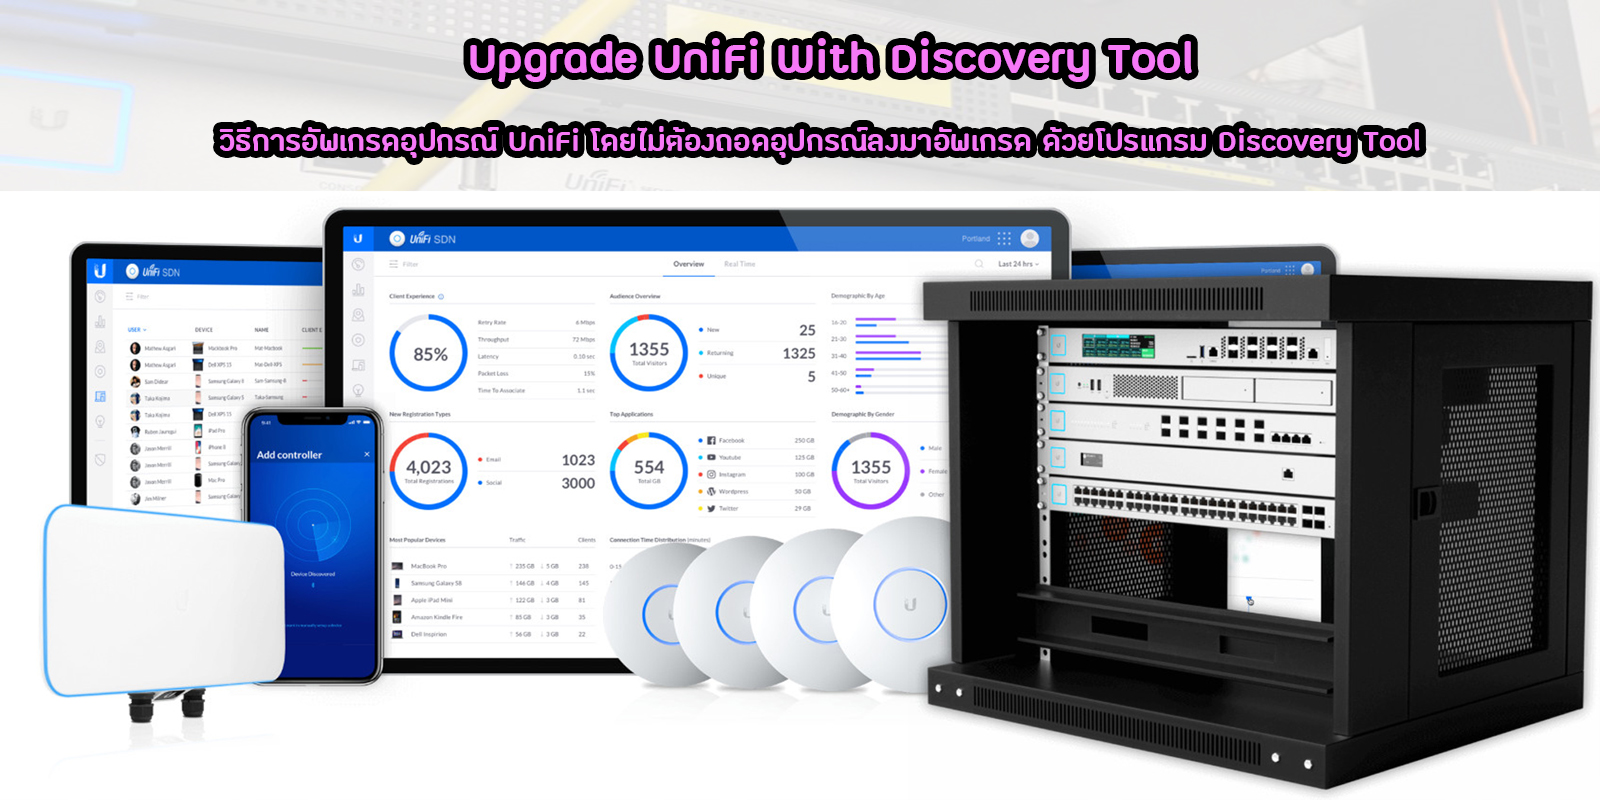 Images/Blog/vVL9wOCL-upgrade unifi discovery tool.jpg